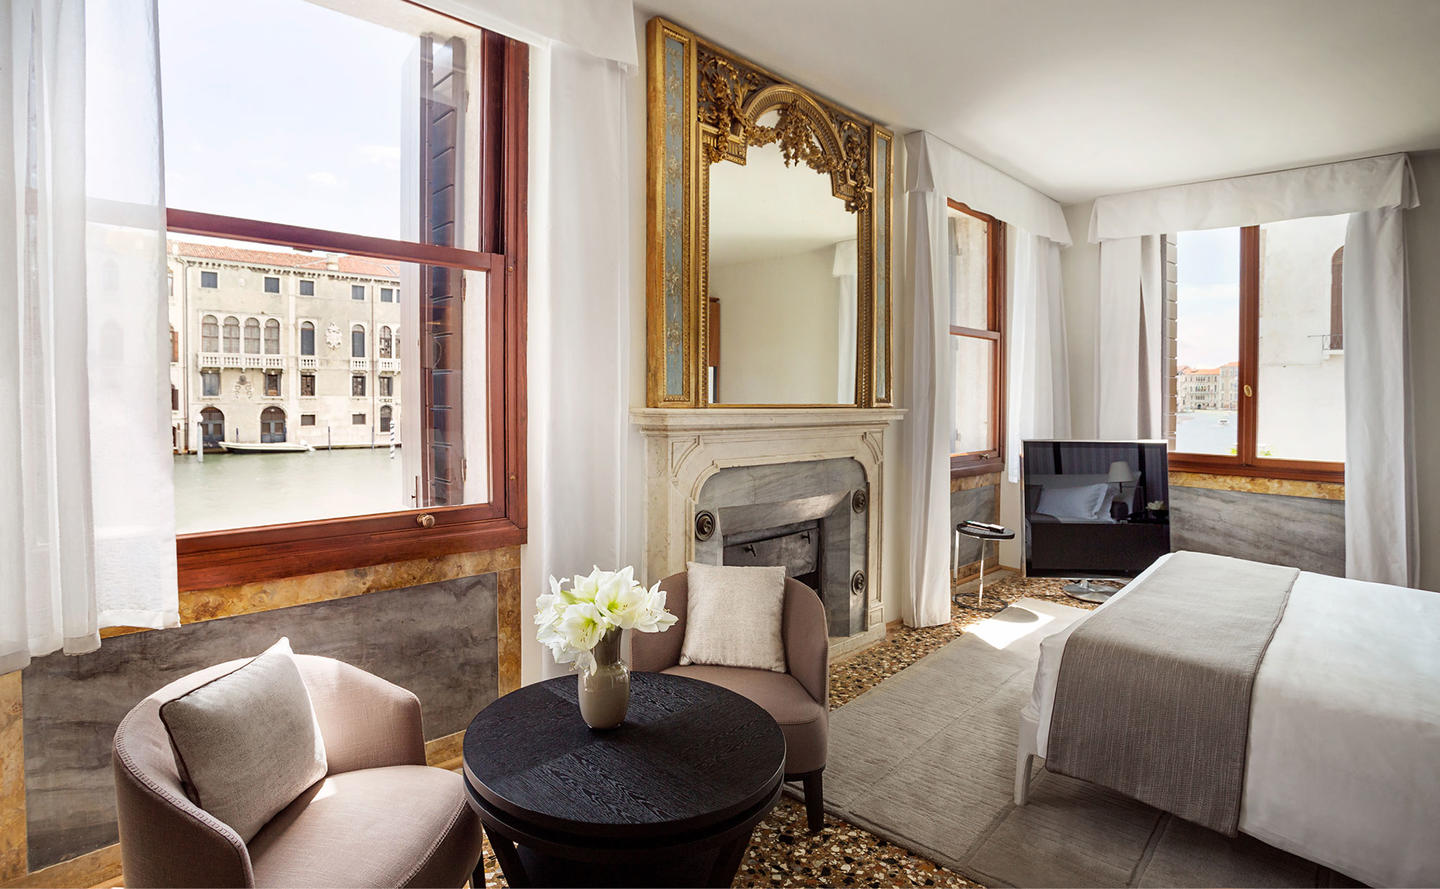 Bedroom, Grand Canal Suite - Aman Venice, Italy